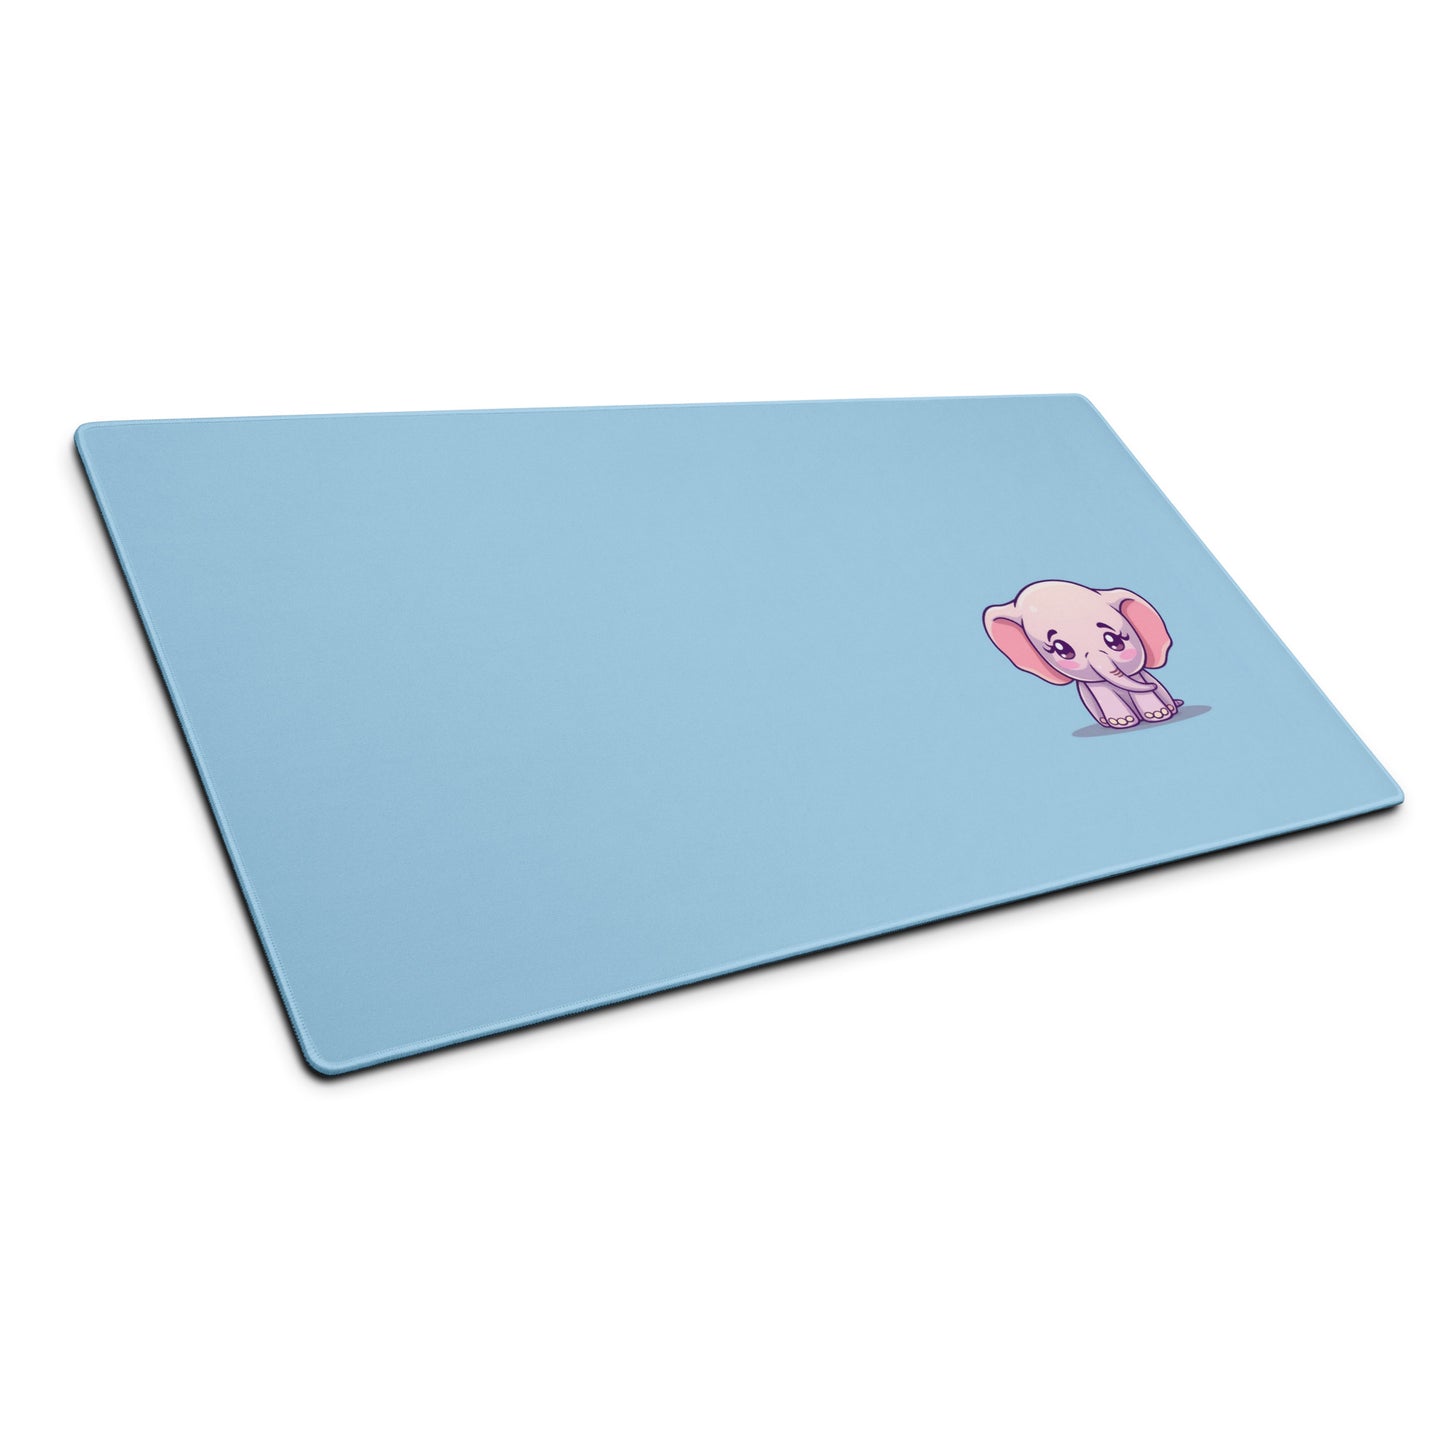 A 36" x 18" desk pad with a cute elephant on it shown at an angle. Blue in color.